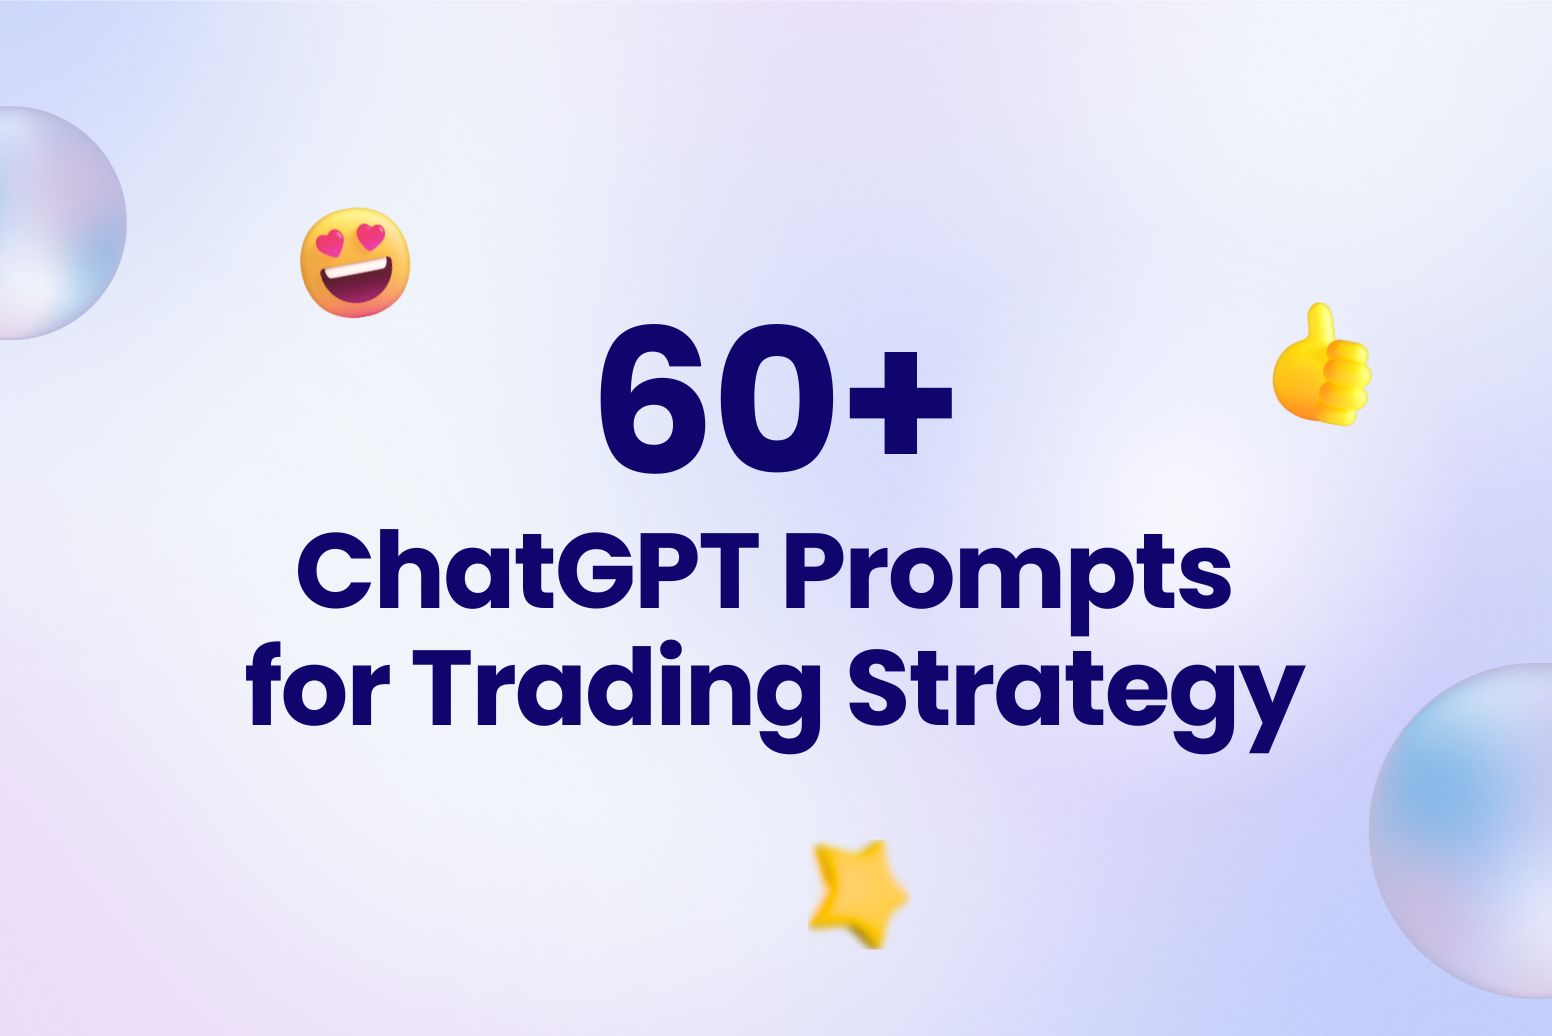 60+ ChatGPT Prompts for Trading Strategy